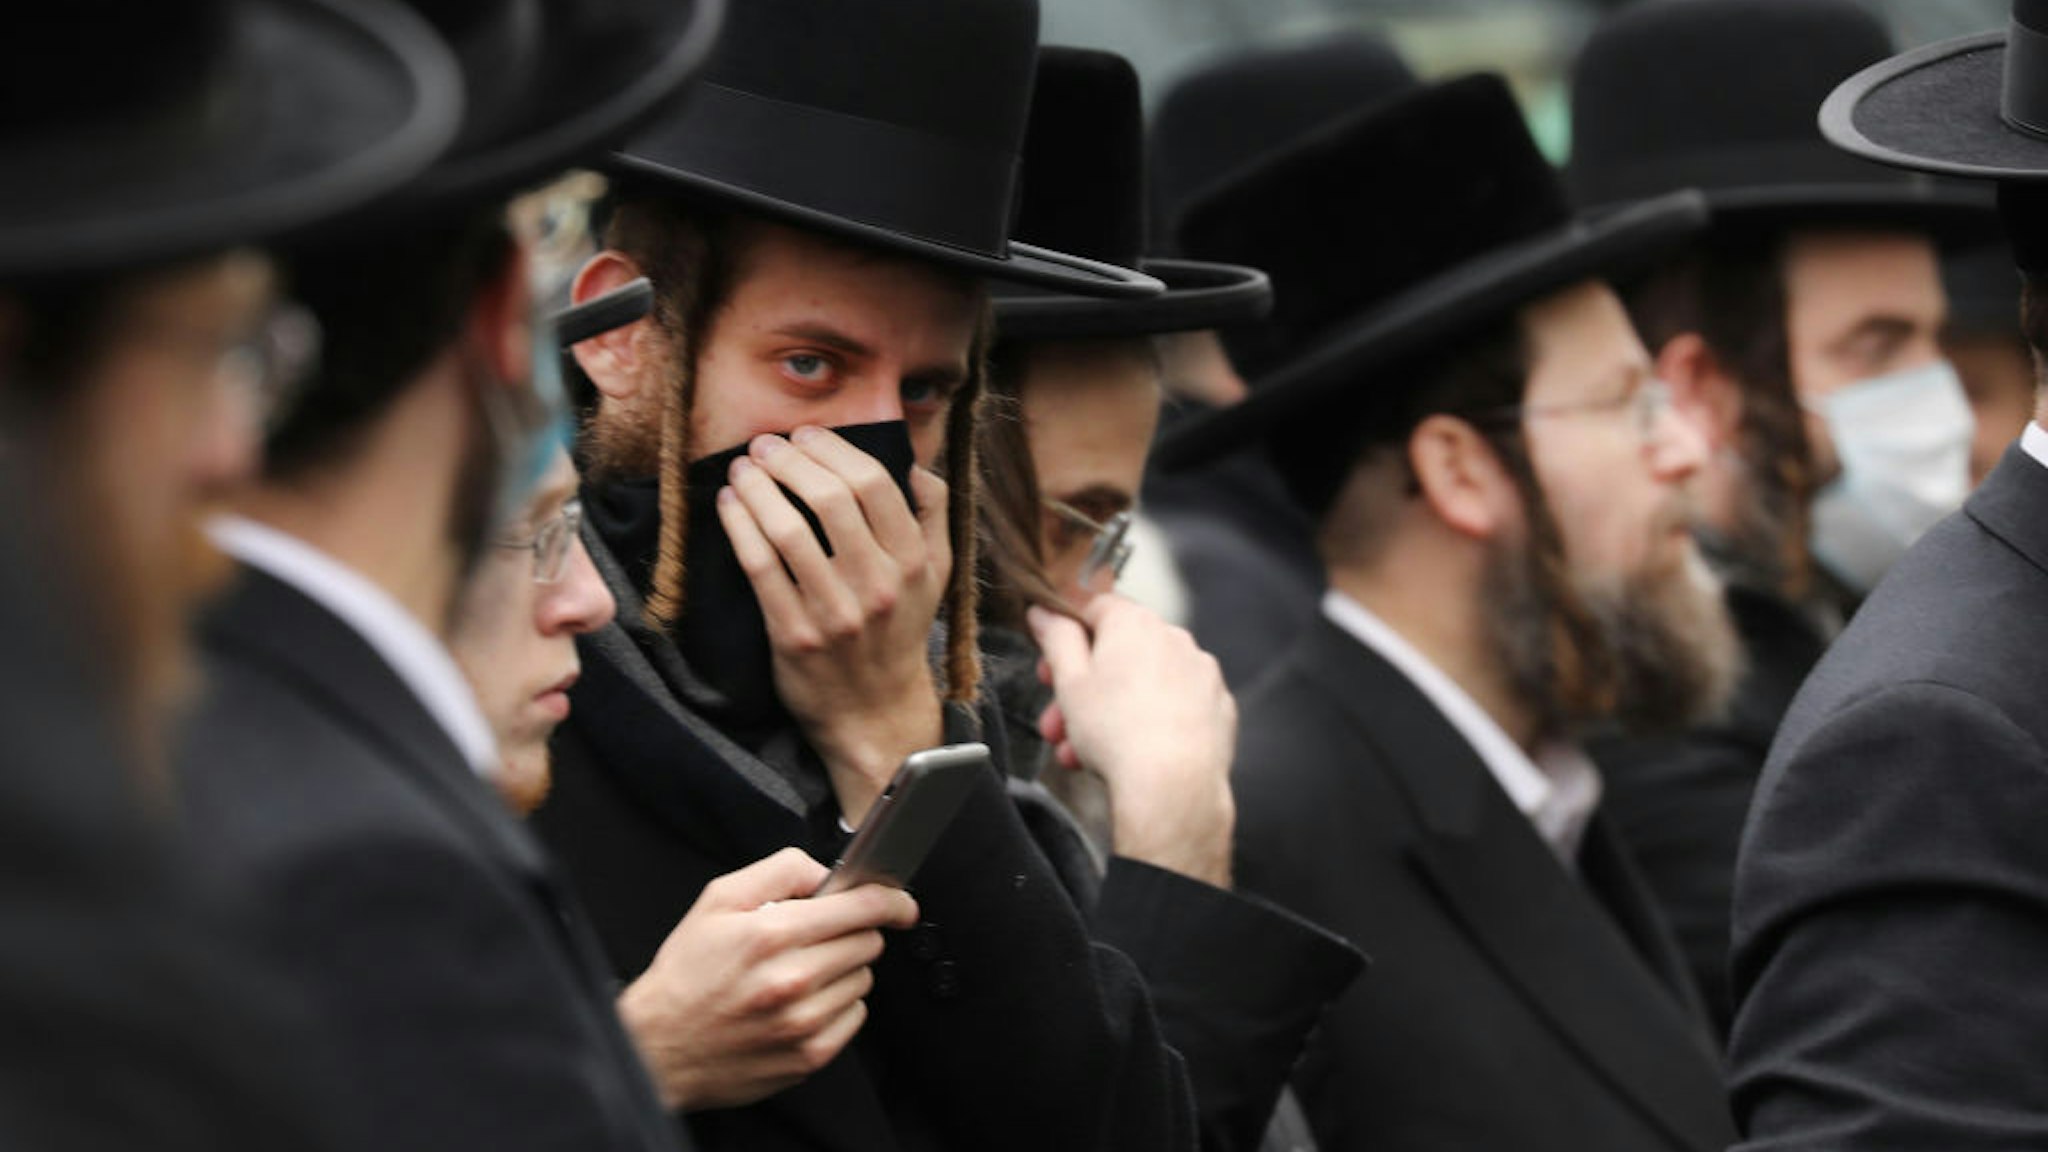 NEW YORK, NY - APRIL 05: Hundreds of members of the Orthodox Jewish community attend the funeral for a rabbi who died from the coronavirus in the Borough Park neighborhood which has seen an upsurge of (COVID-19) patients during the pandemic on April 05, 2020 in the Brooklyn Borough of New York City. Hospitals in New York City, which has been especially hard hit by the coronavirus, are facing shortages of beds, ventilators and protective equipment for medical staff. Currently, over 122,000 New Yorkers have tested positive for coronavirus. (Photo by Spencer Platt/Getty Images)